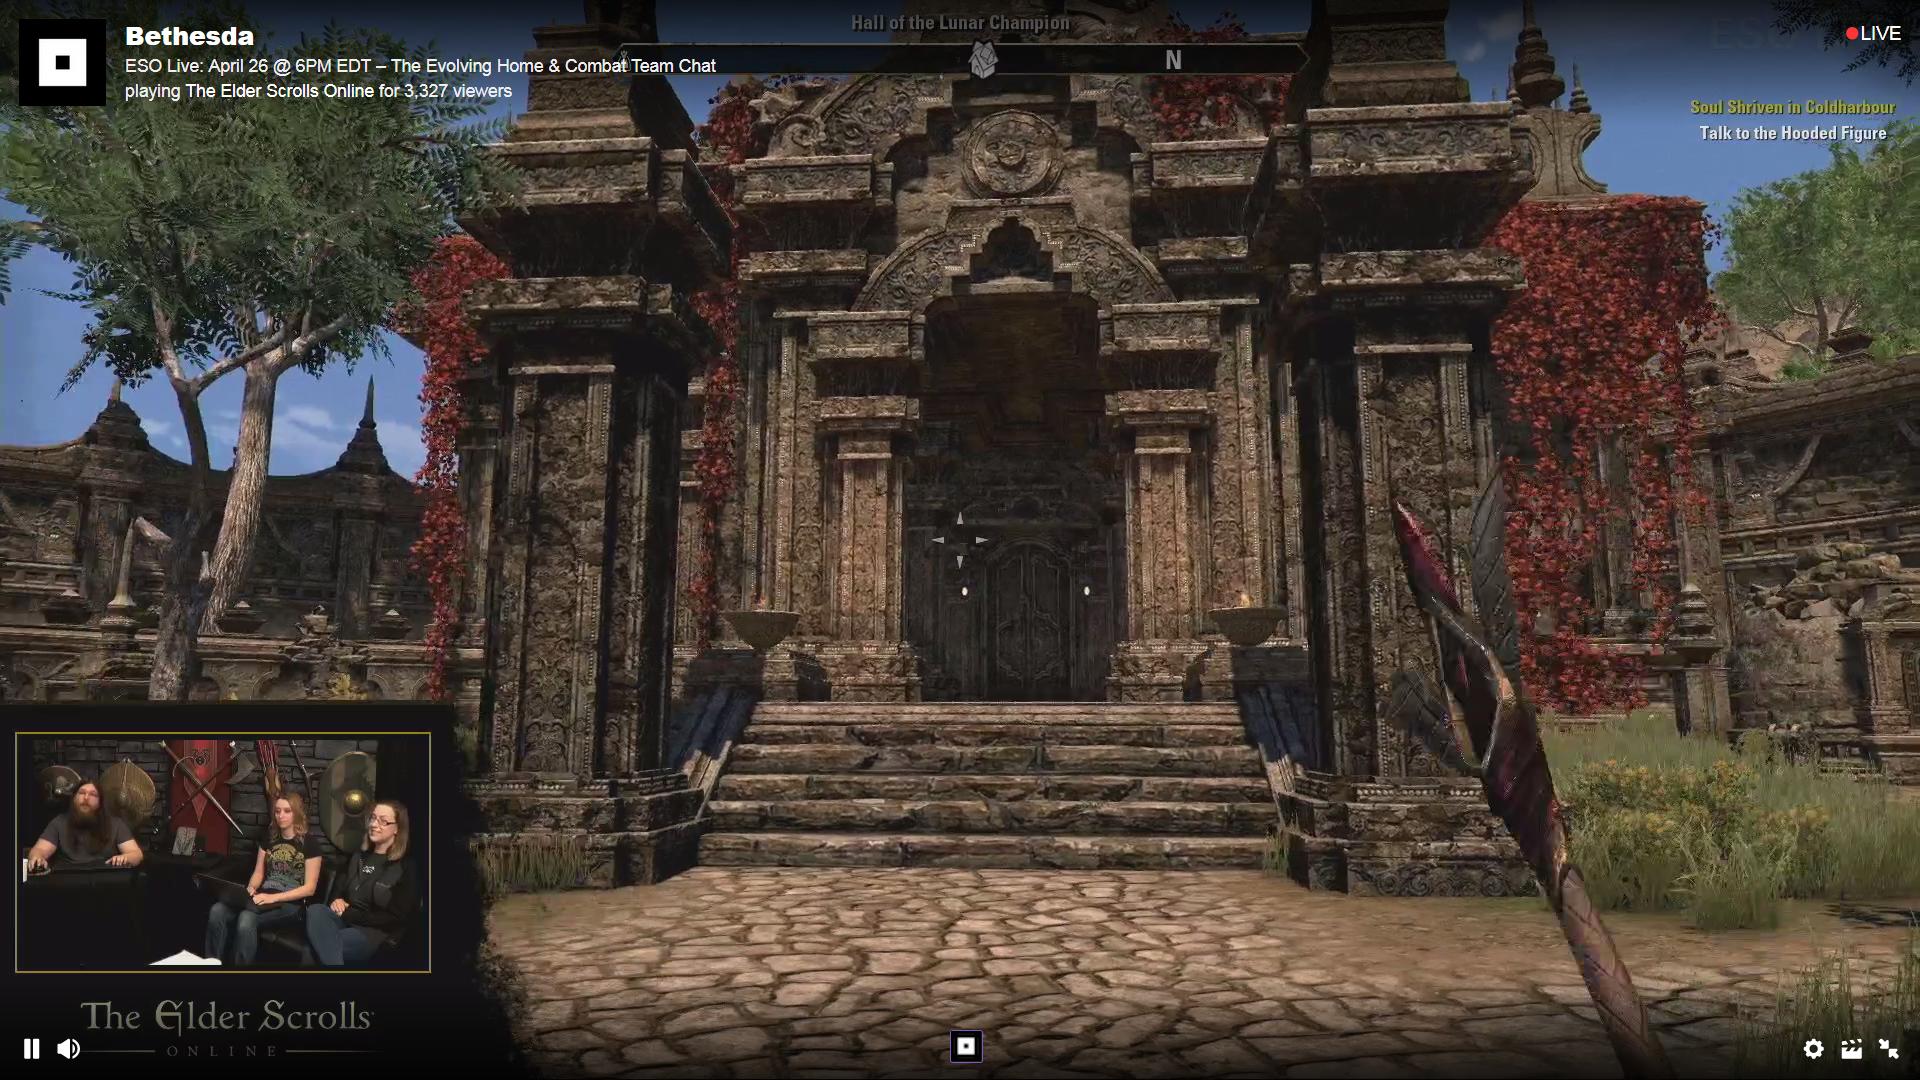 UESP a Twitter: "#ESOLive Cullen Lee is talking about Hall of the Lunar Champion in Rimmen, #Elsweyr, which is the since inn rooms that a house has been